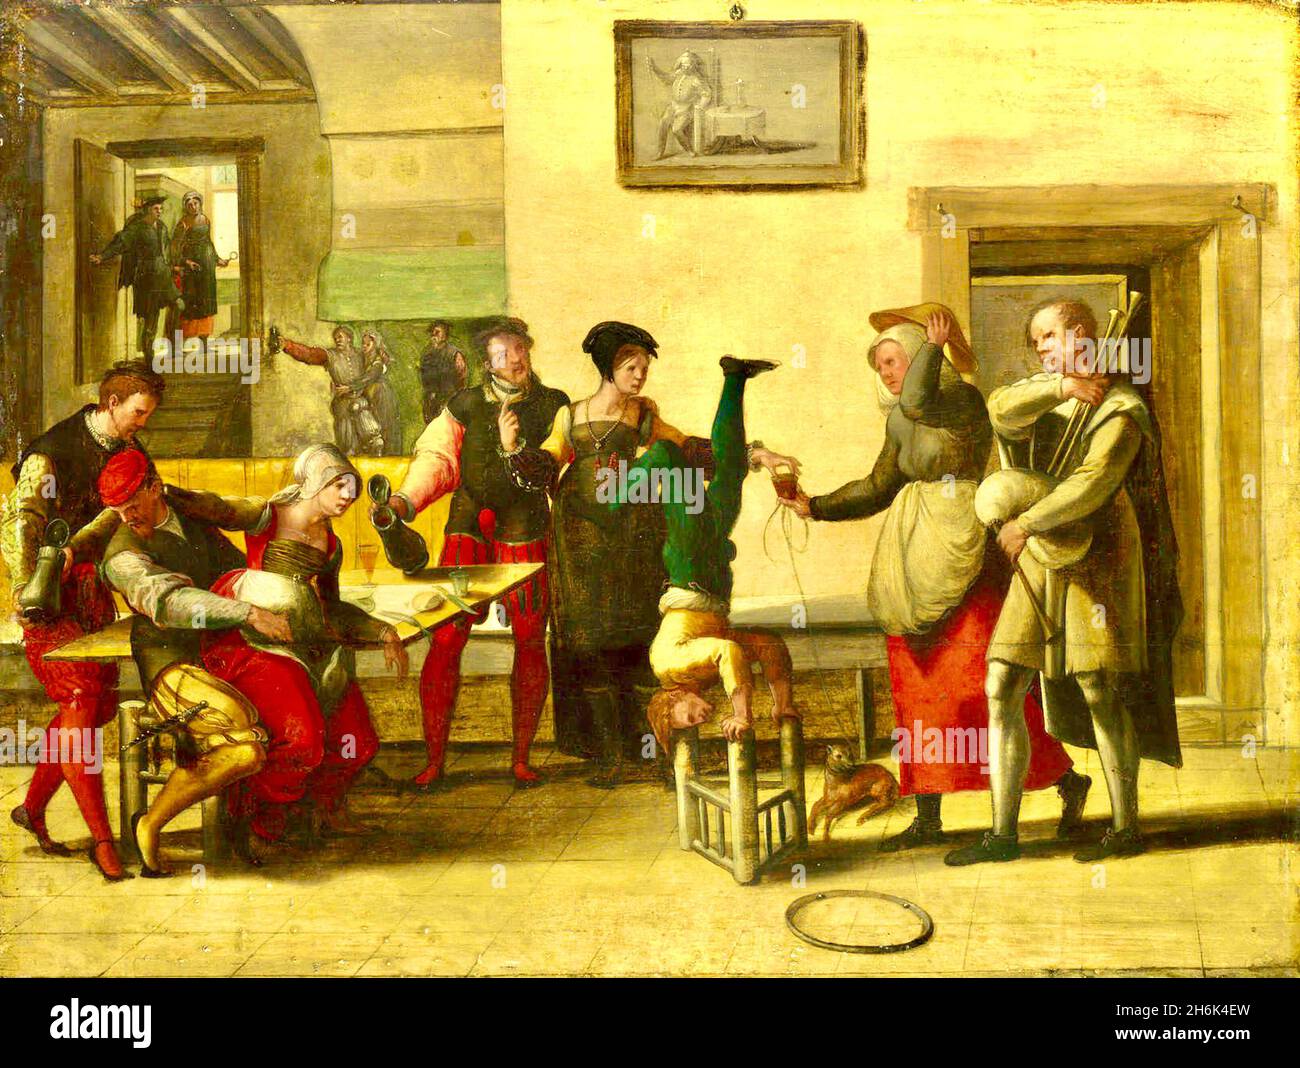 Itinerant Entertainers in a Brothel by The Brunswick Monogrammist (circle of) - 1550's Stock Photo